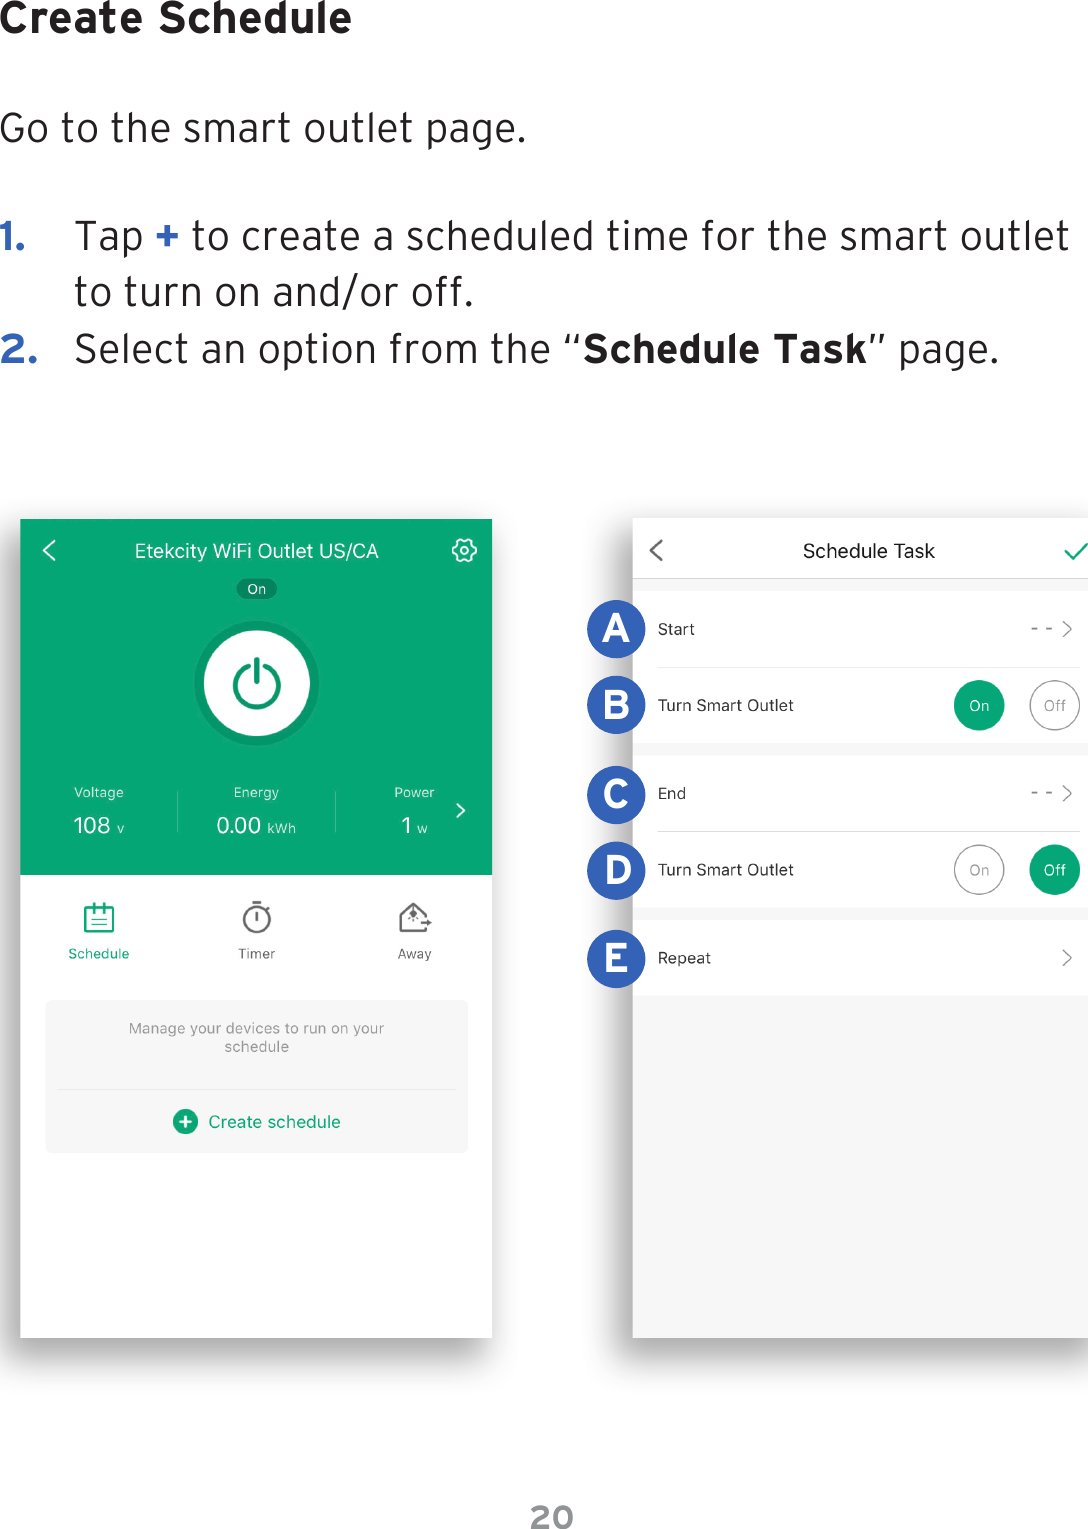 20Create ScheduleGo to the smart outlet page.1.  Tap + to create a scheduled time for the smart outlet to turn on and/or off.2.  Select an option from the “Schedule Task” page.BACDE- -- -